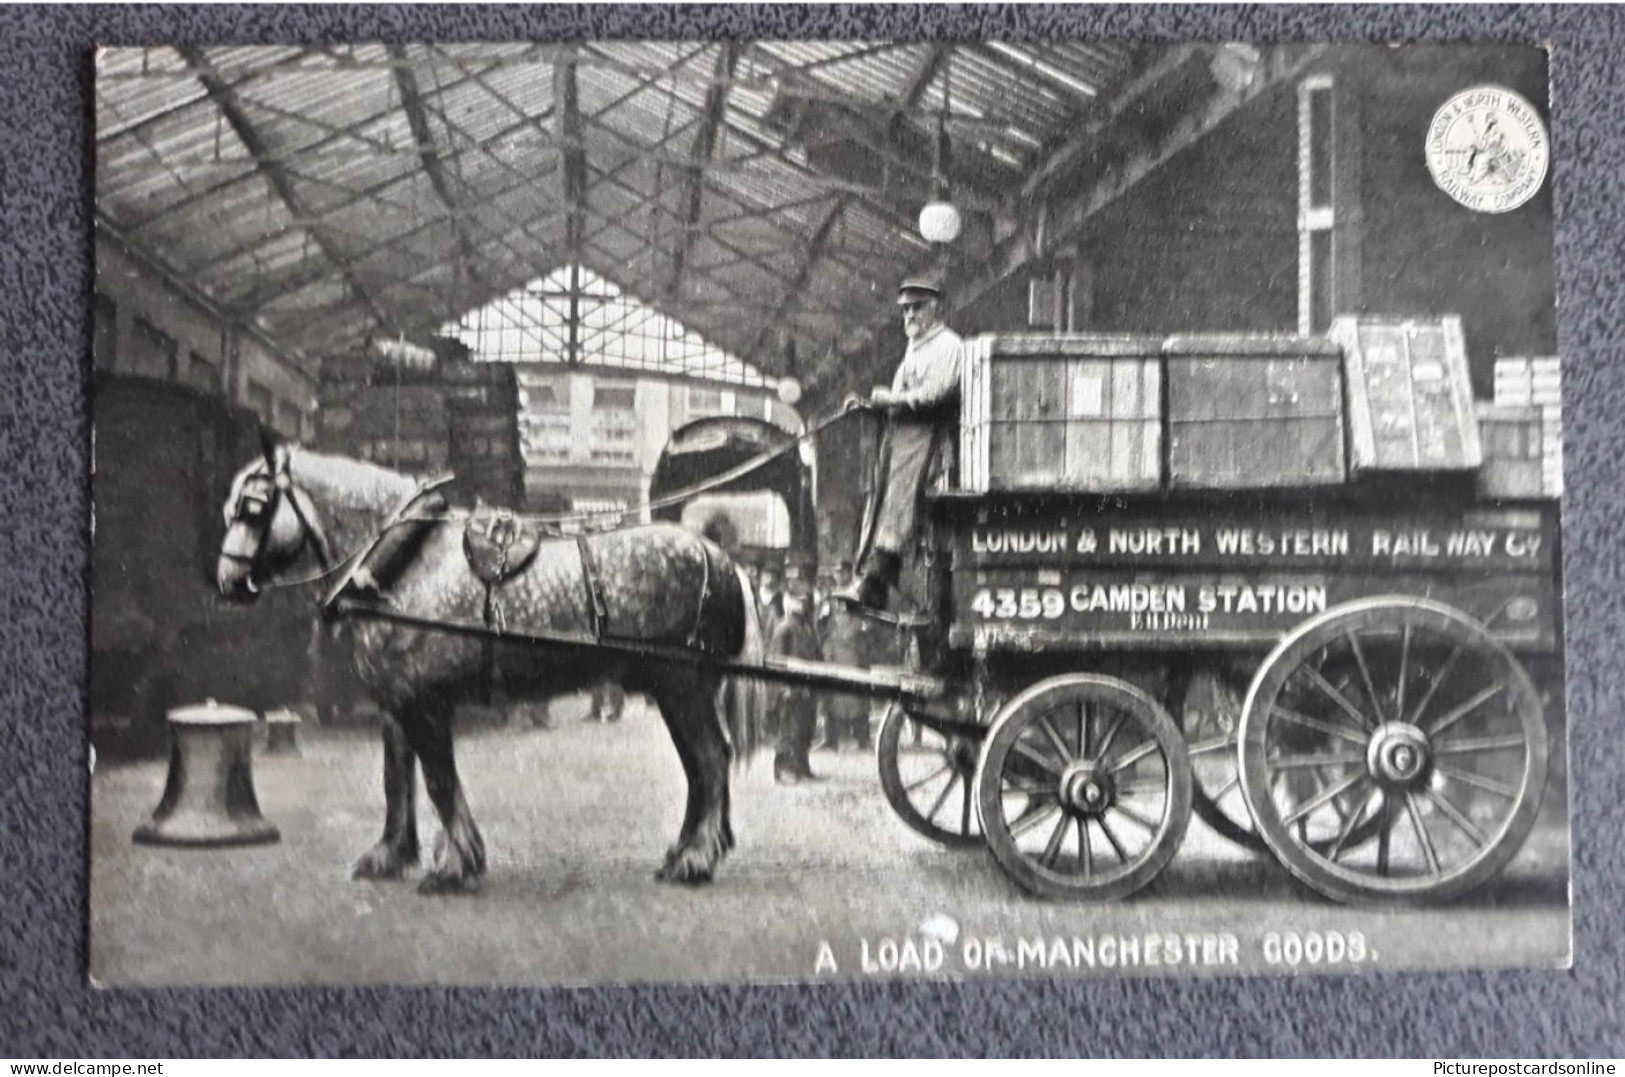 A LOAD OF MANCHESTER GOODS OLD B/W POSTCARD LONDON & NORTH WESTERN OFFICIAL L&N.W.R. CAMDEN STATION - Ouvrages D'Art